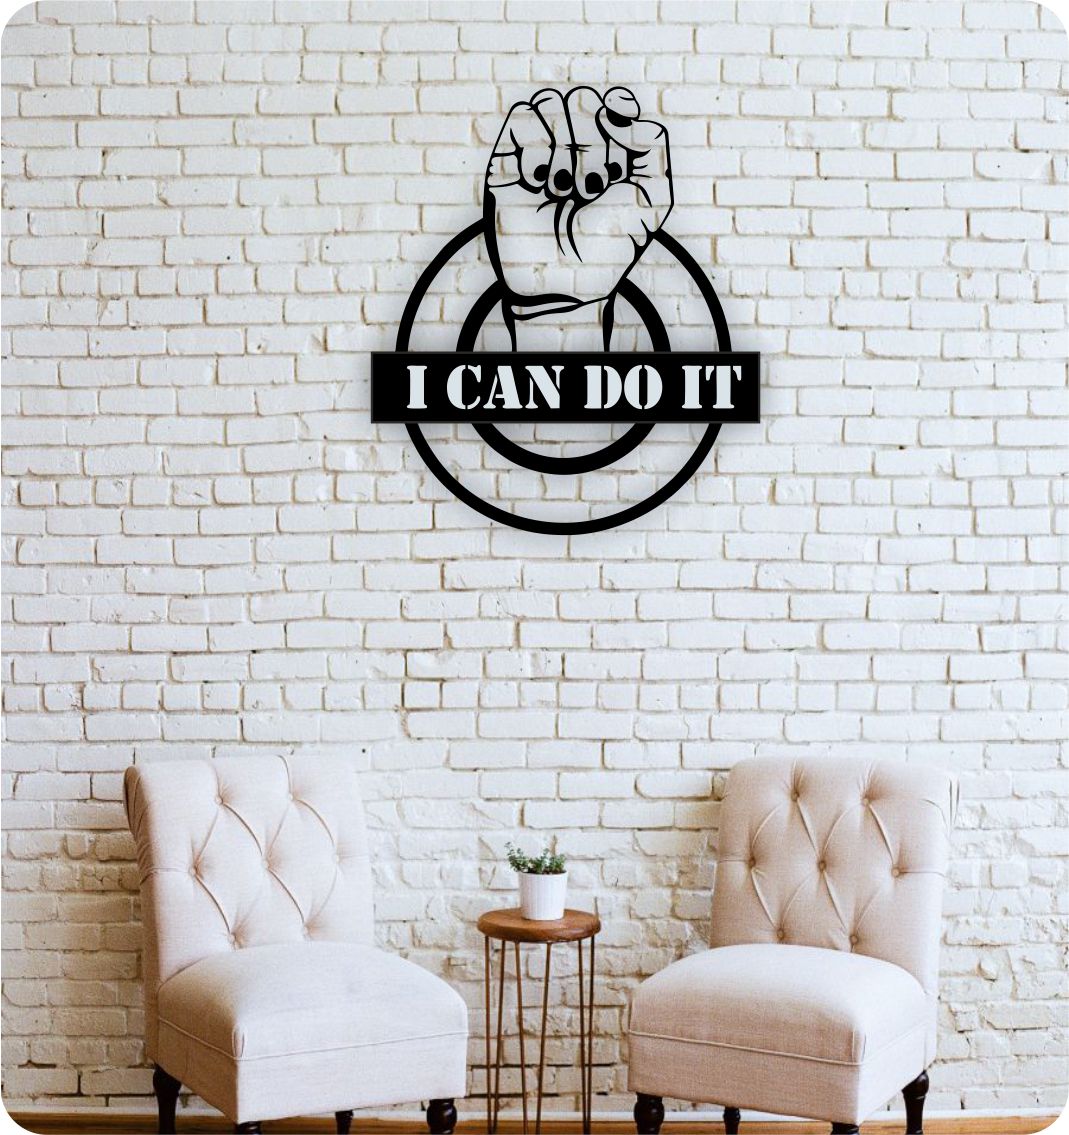 ican do it – 1